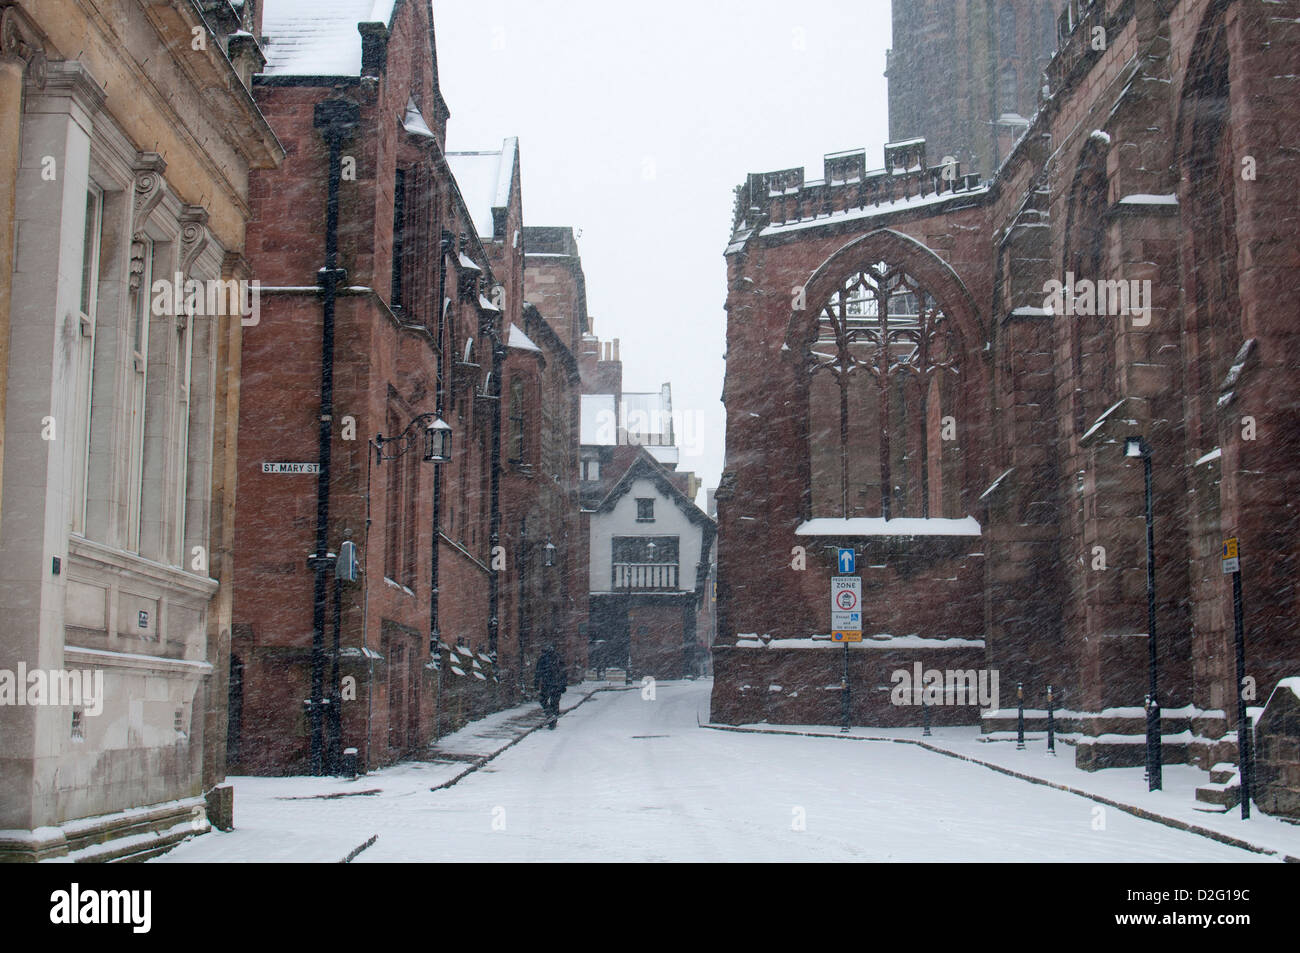 Bayley Lane in snowy weather, Coventry, UK Stock Photo